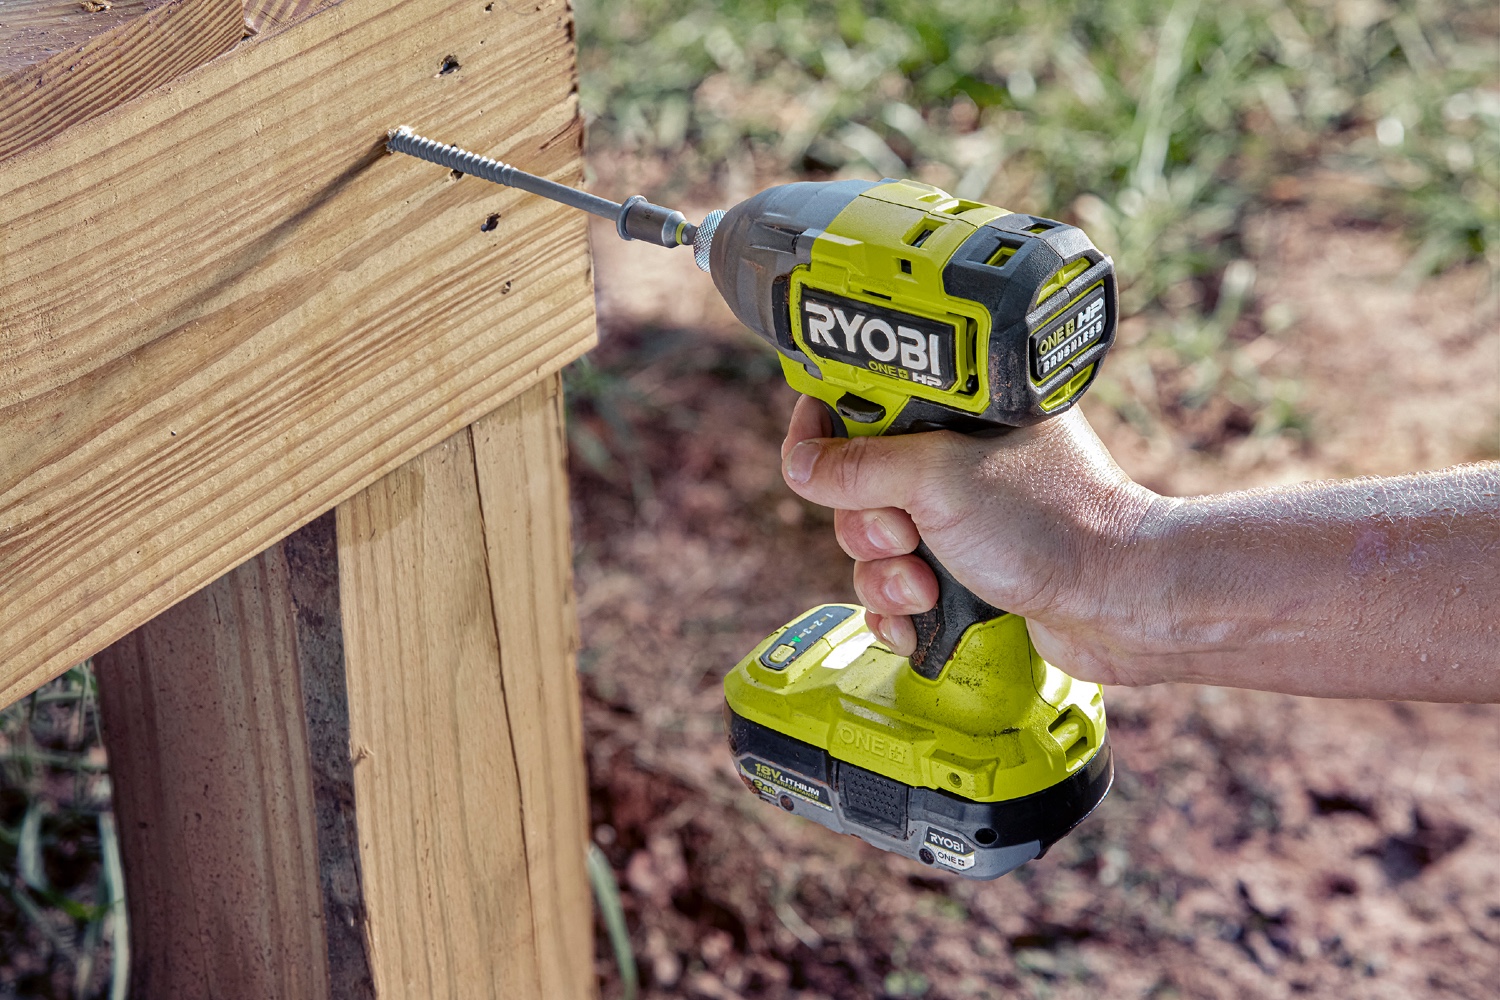 A person using the best Ryobi drill to drive a large screw into an outdoor wooden structure.